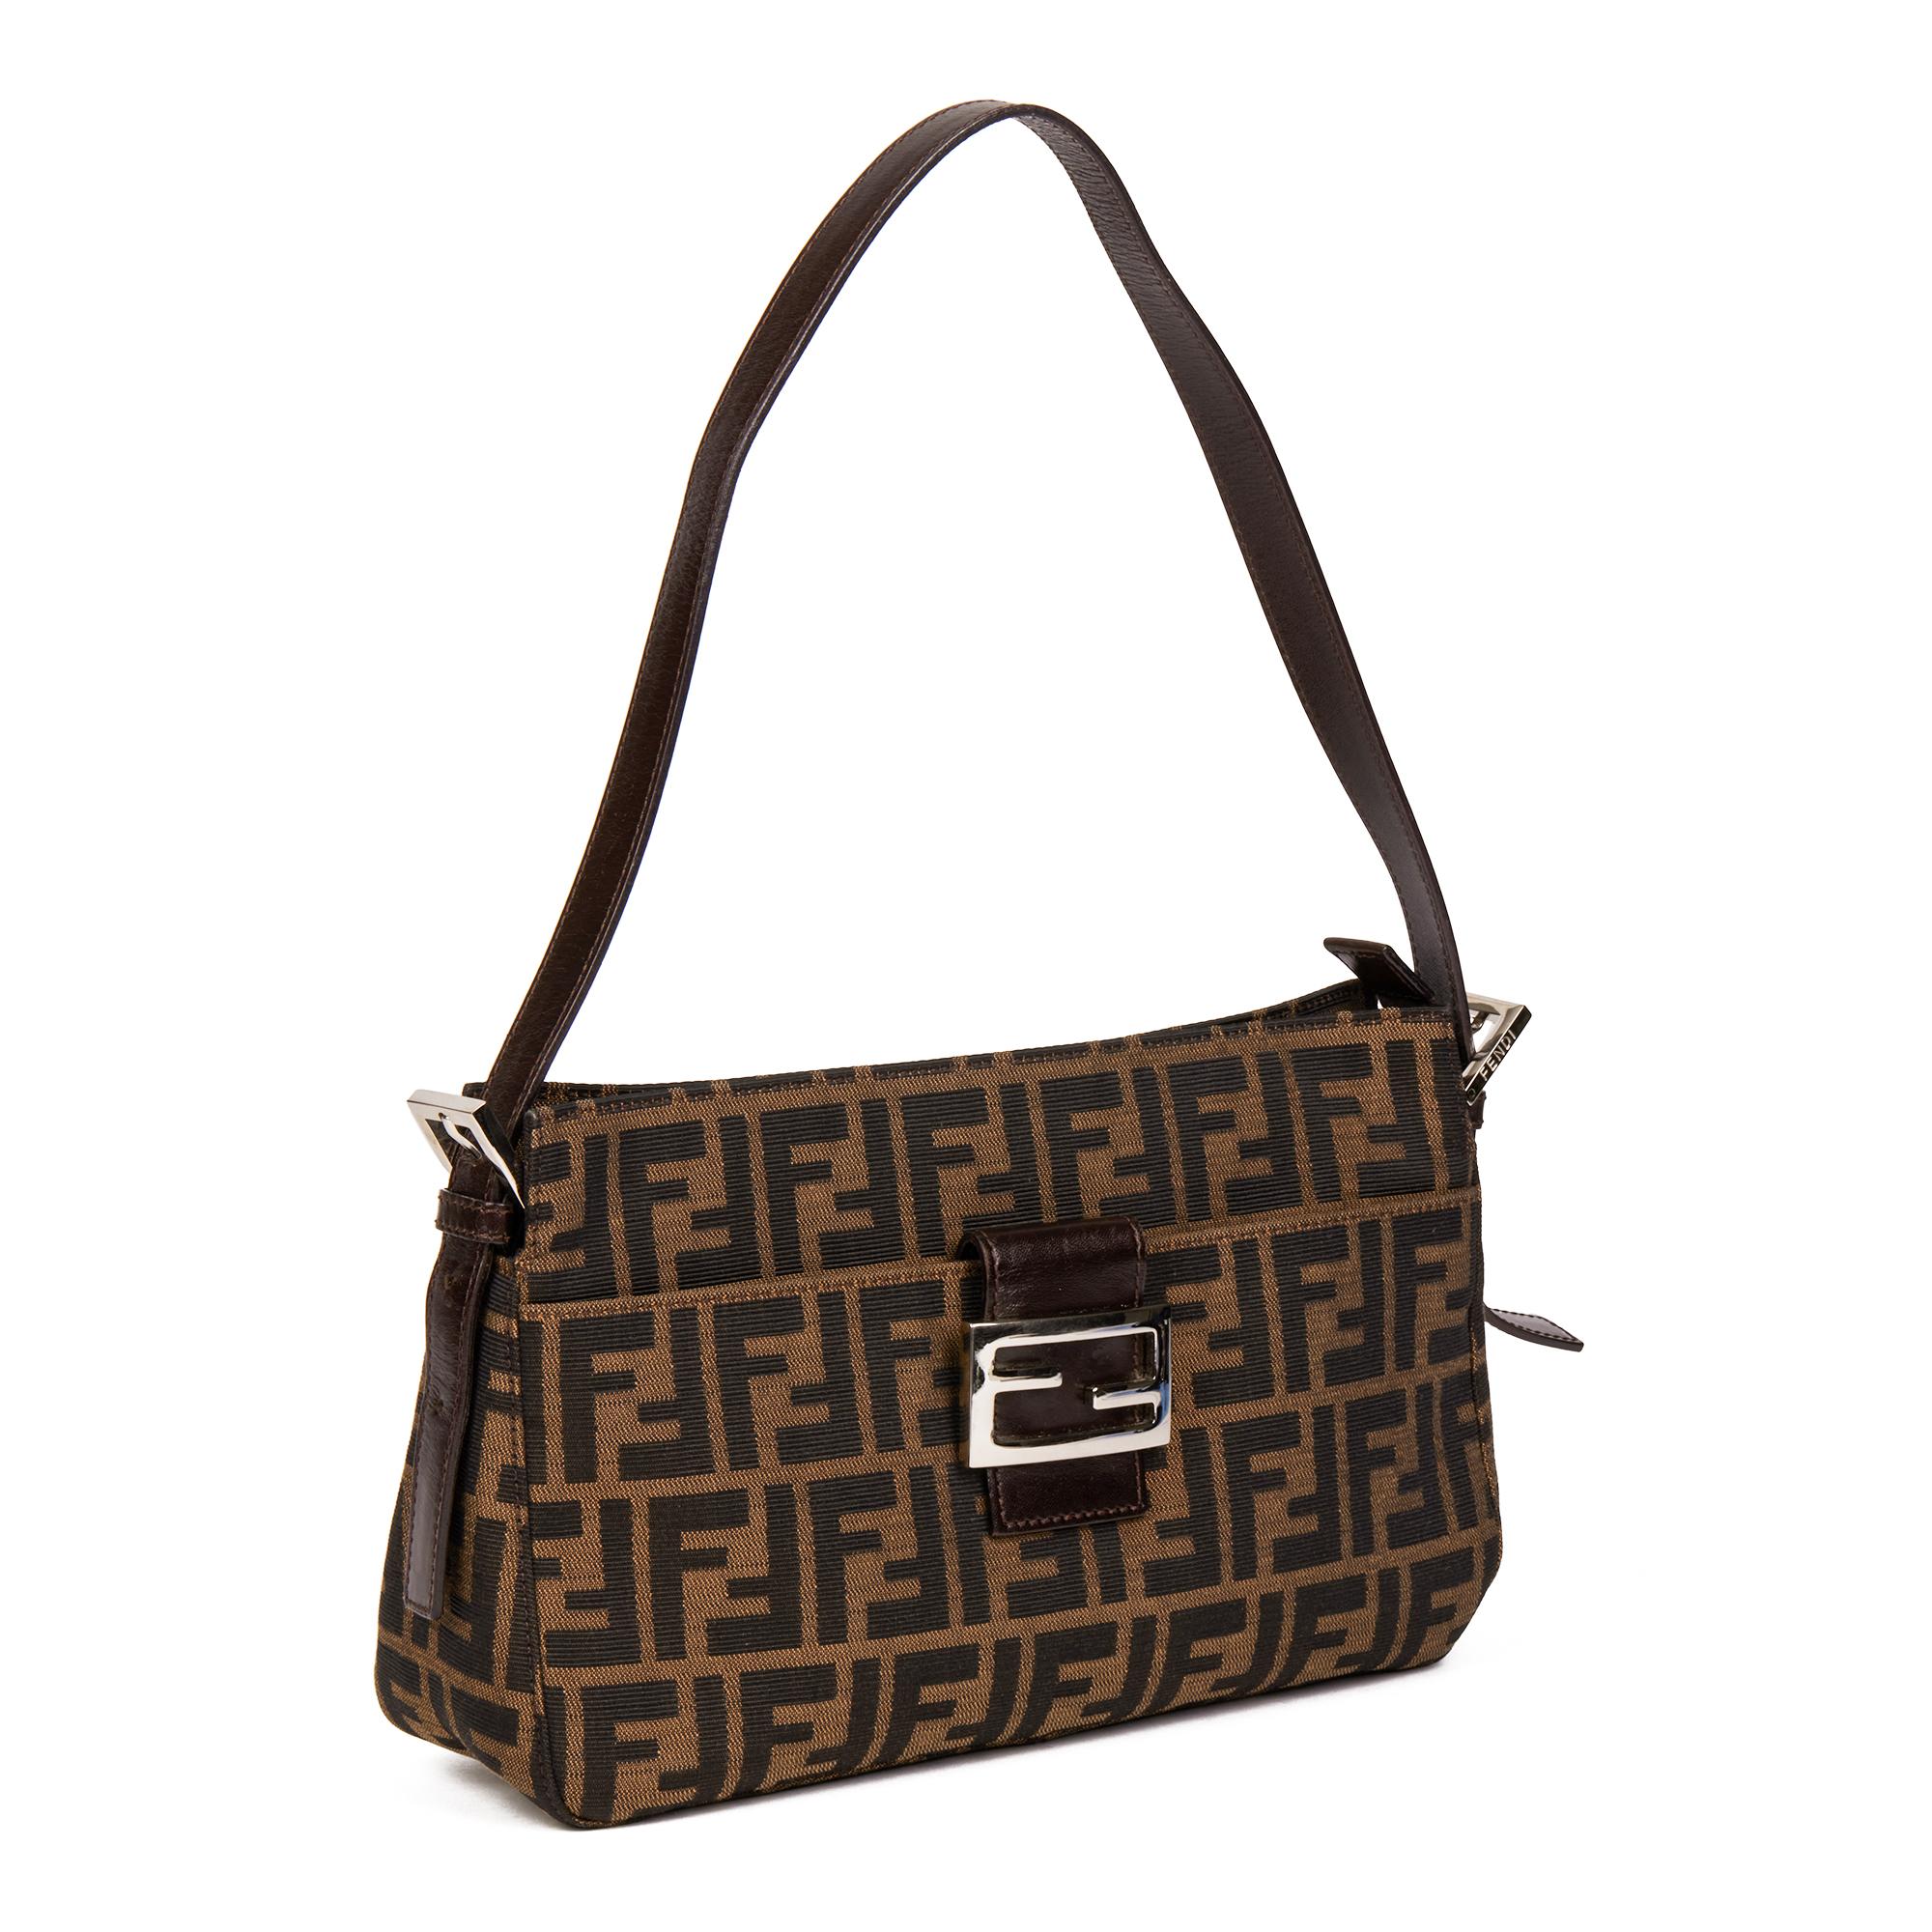 FENDI
Brown Zucca Canvas & Calfskin Leather Vintage Pochette Baguette

Xupes Reference: HB4292
Serial Number: 2223-6566-089
Age (Circa): 2000
Accompanied By: Fendi Dust Bag
Authenticity Details: Date Stamp (Made in Italy)
Gender: Ladies
Type: